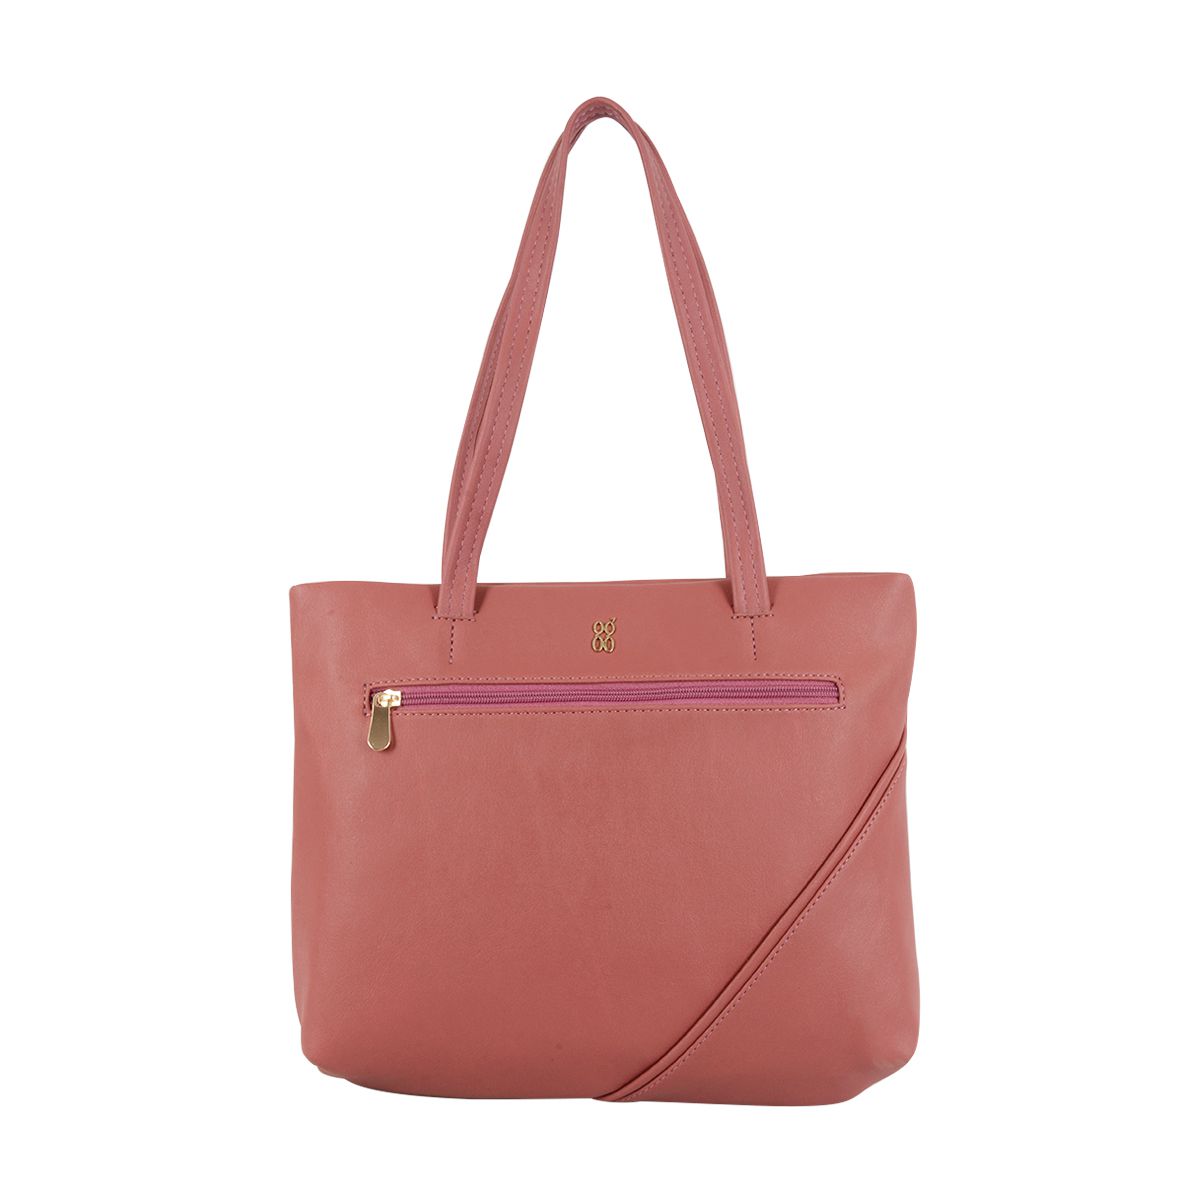     			Baggit Peach Faux Leather Tote Bag